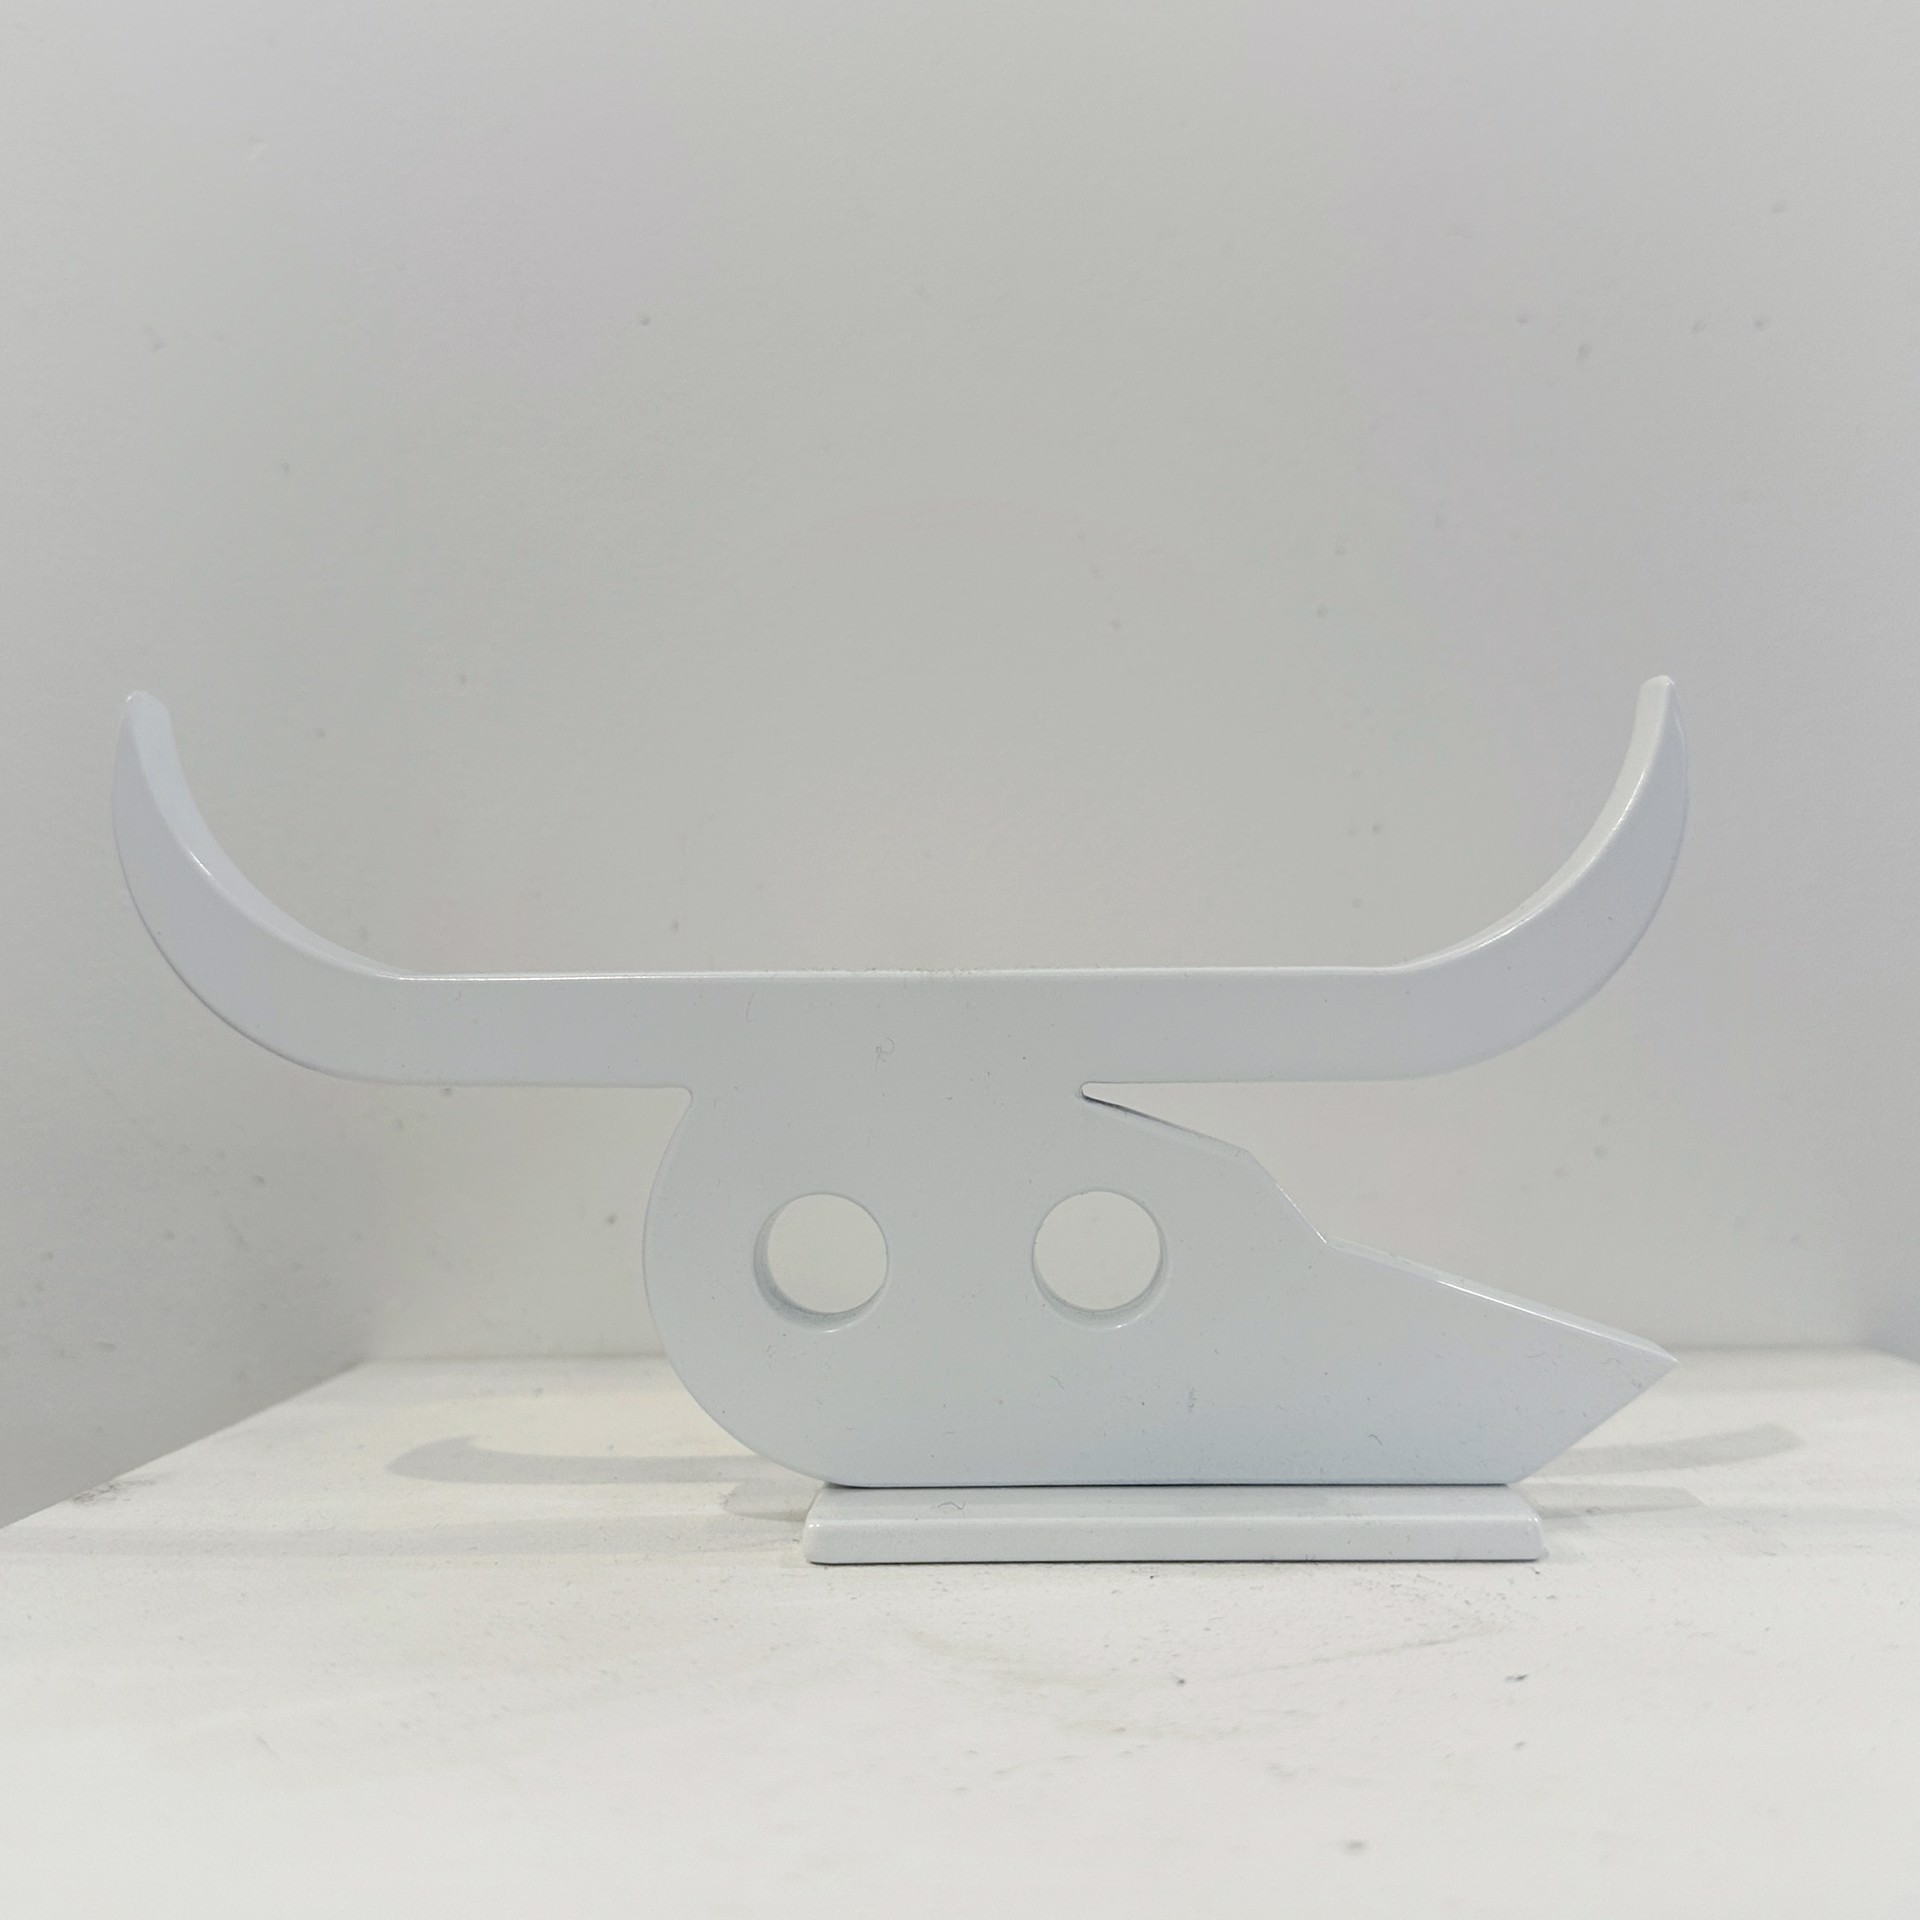 Aluminium Sculpture By Jeffie Brewer Featuring A Longhorn Skull In Simplified Shapes And White Finish